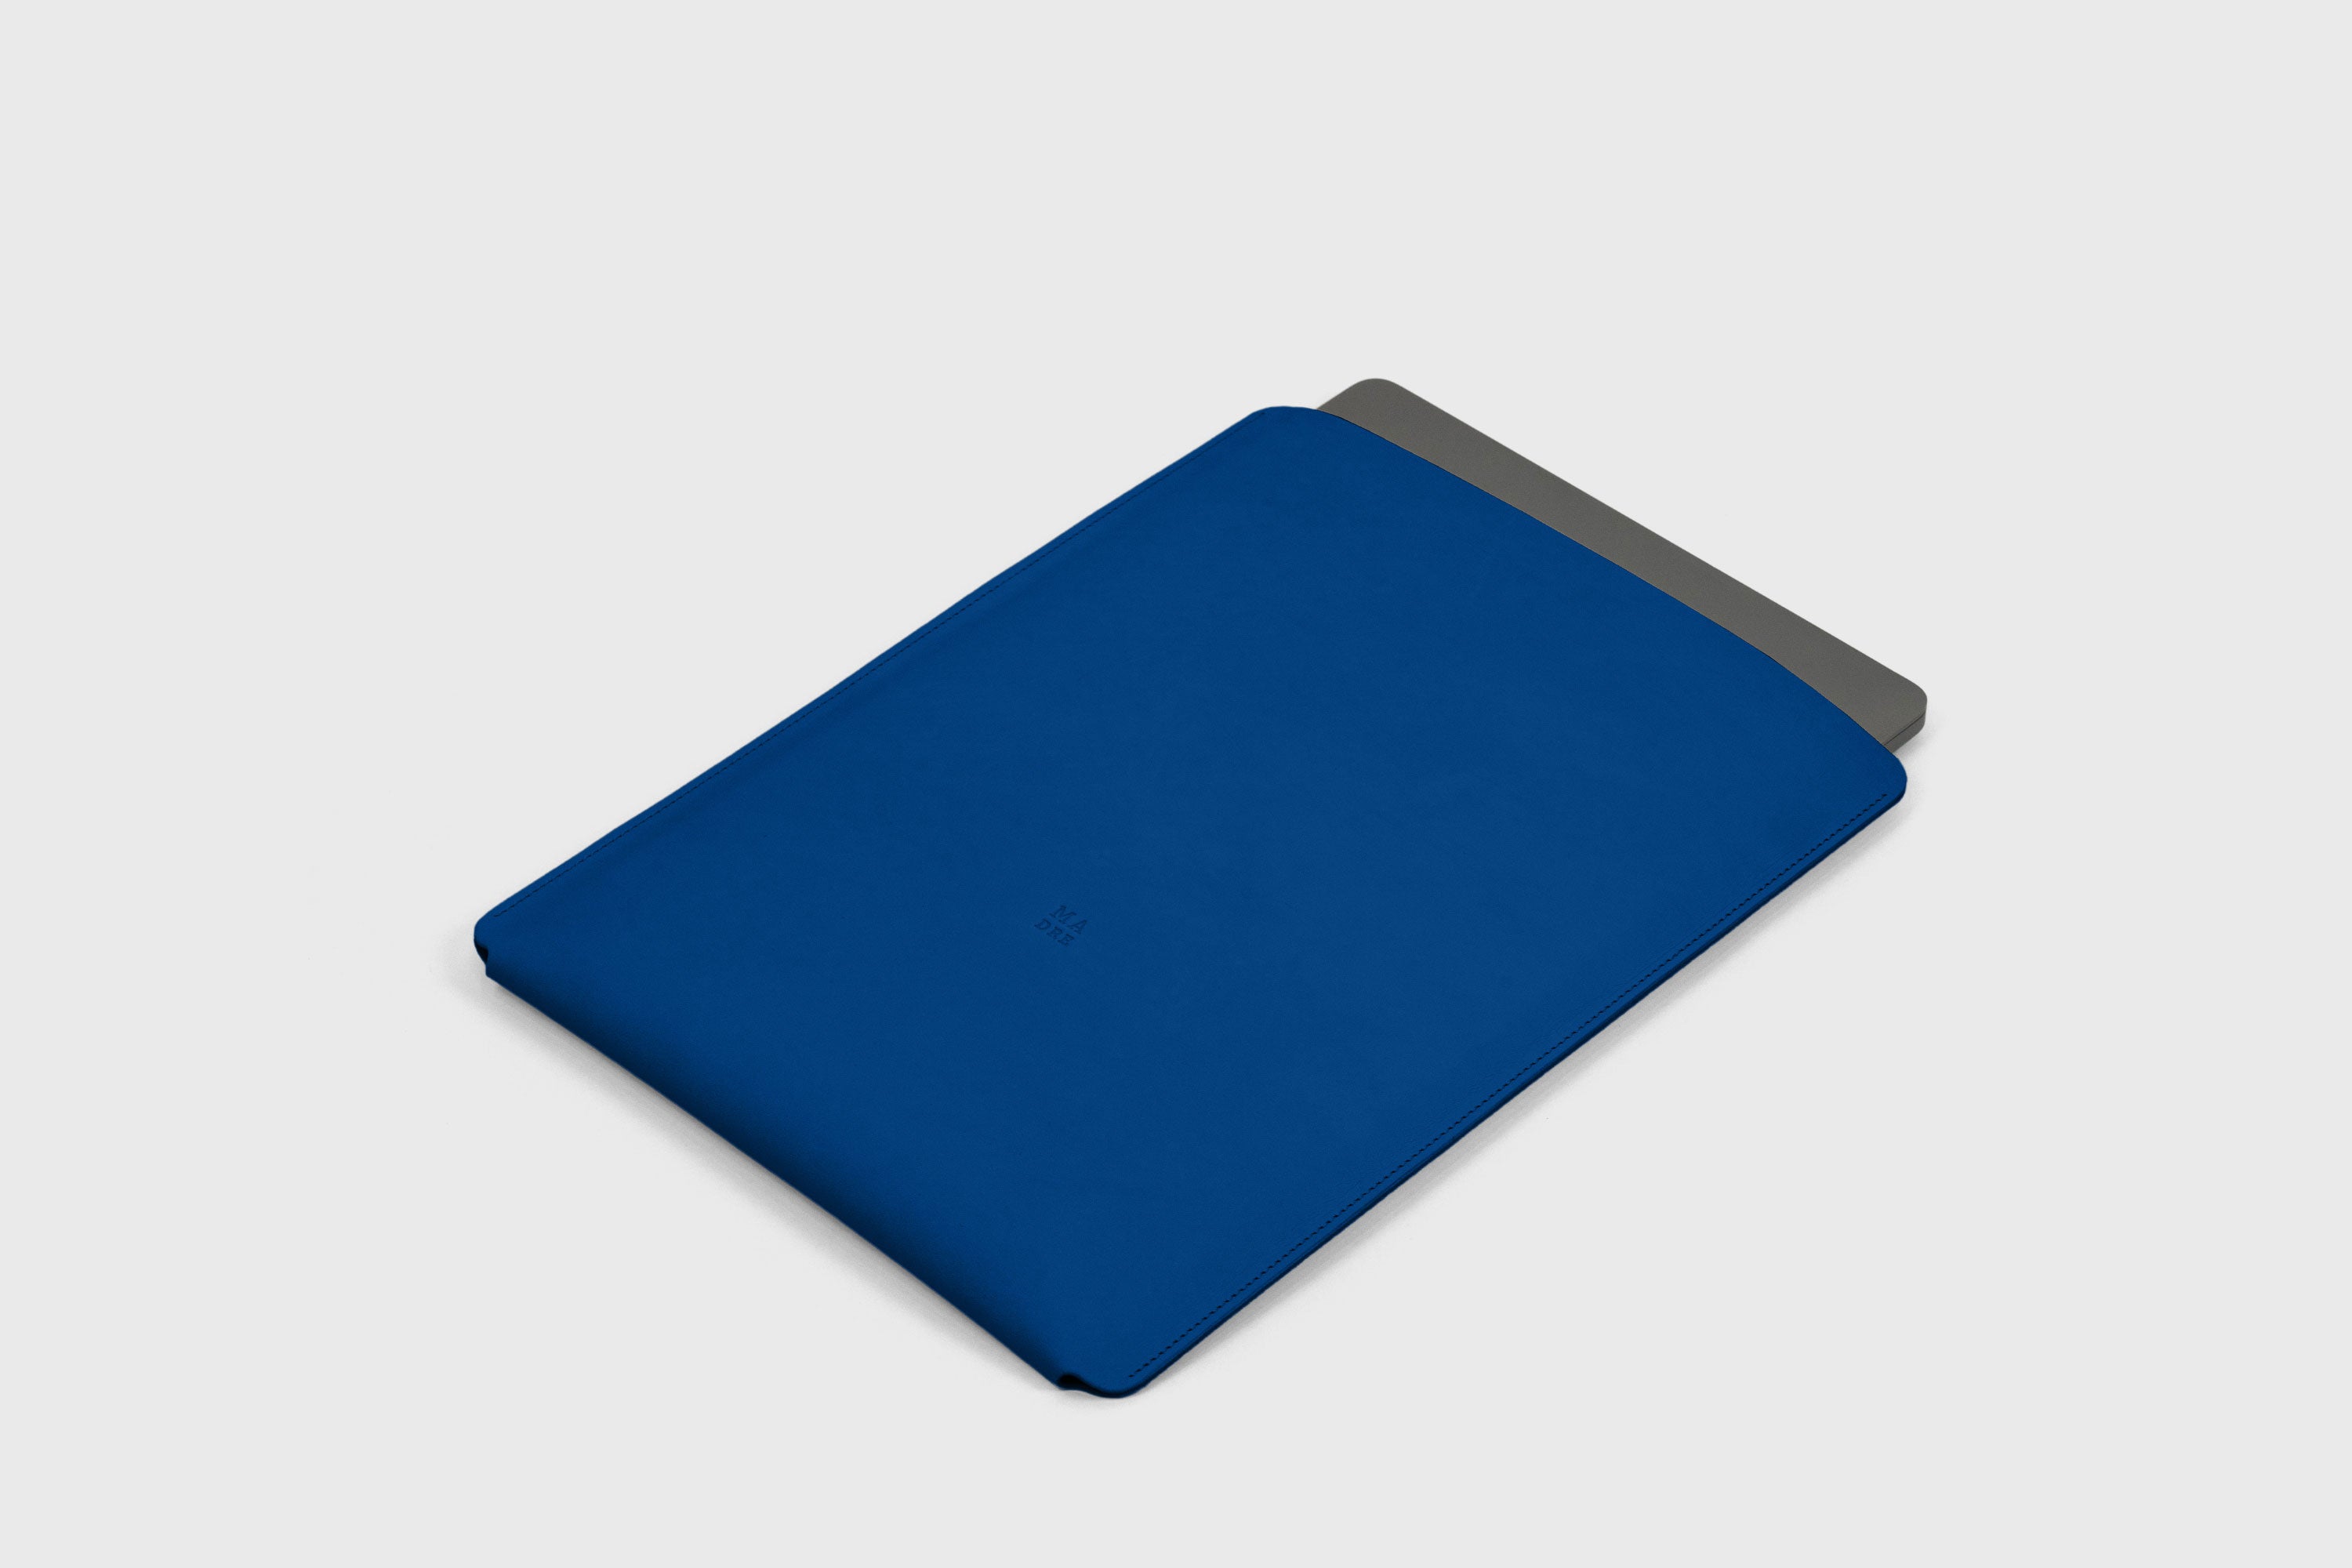 MacBook Pro Sleeve 16 Inch Leather Premium Royal Blue Vegetable Tanned Leather Minimalistic Design By Manuel Dreesmann Atelier Madre Barcelona Spain